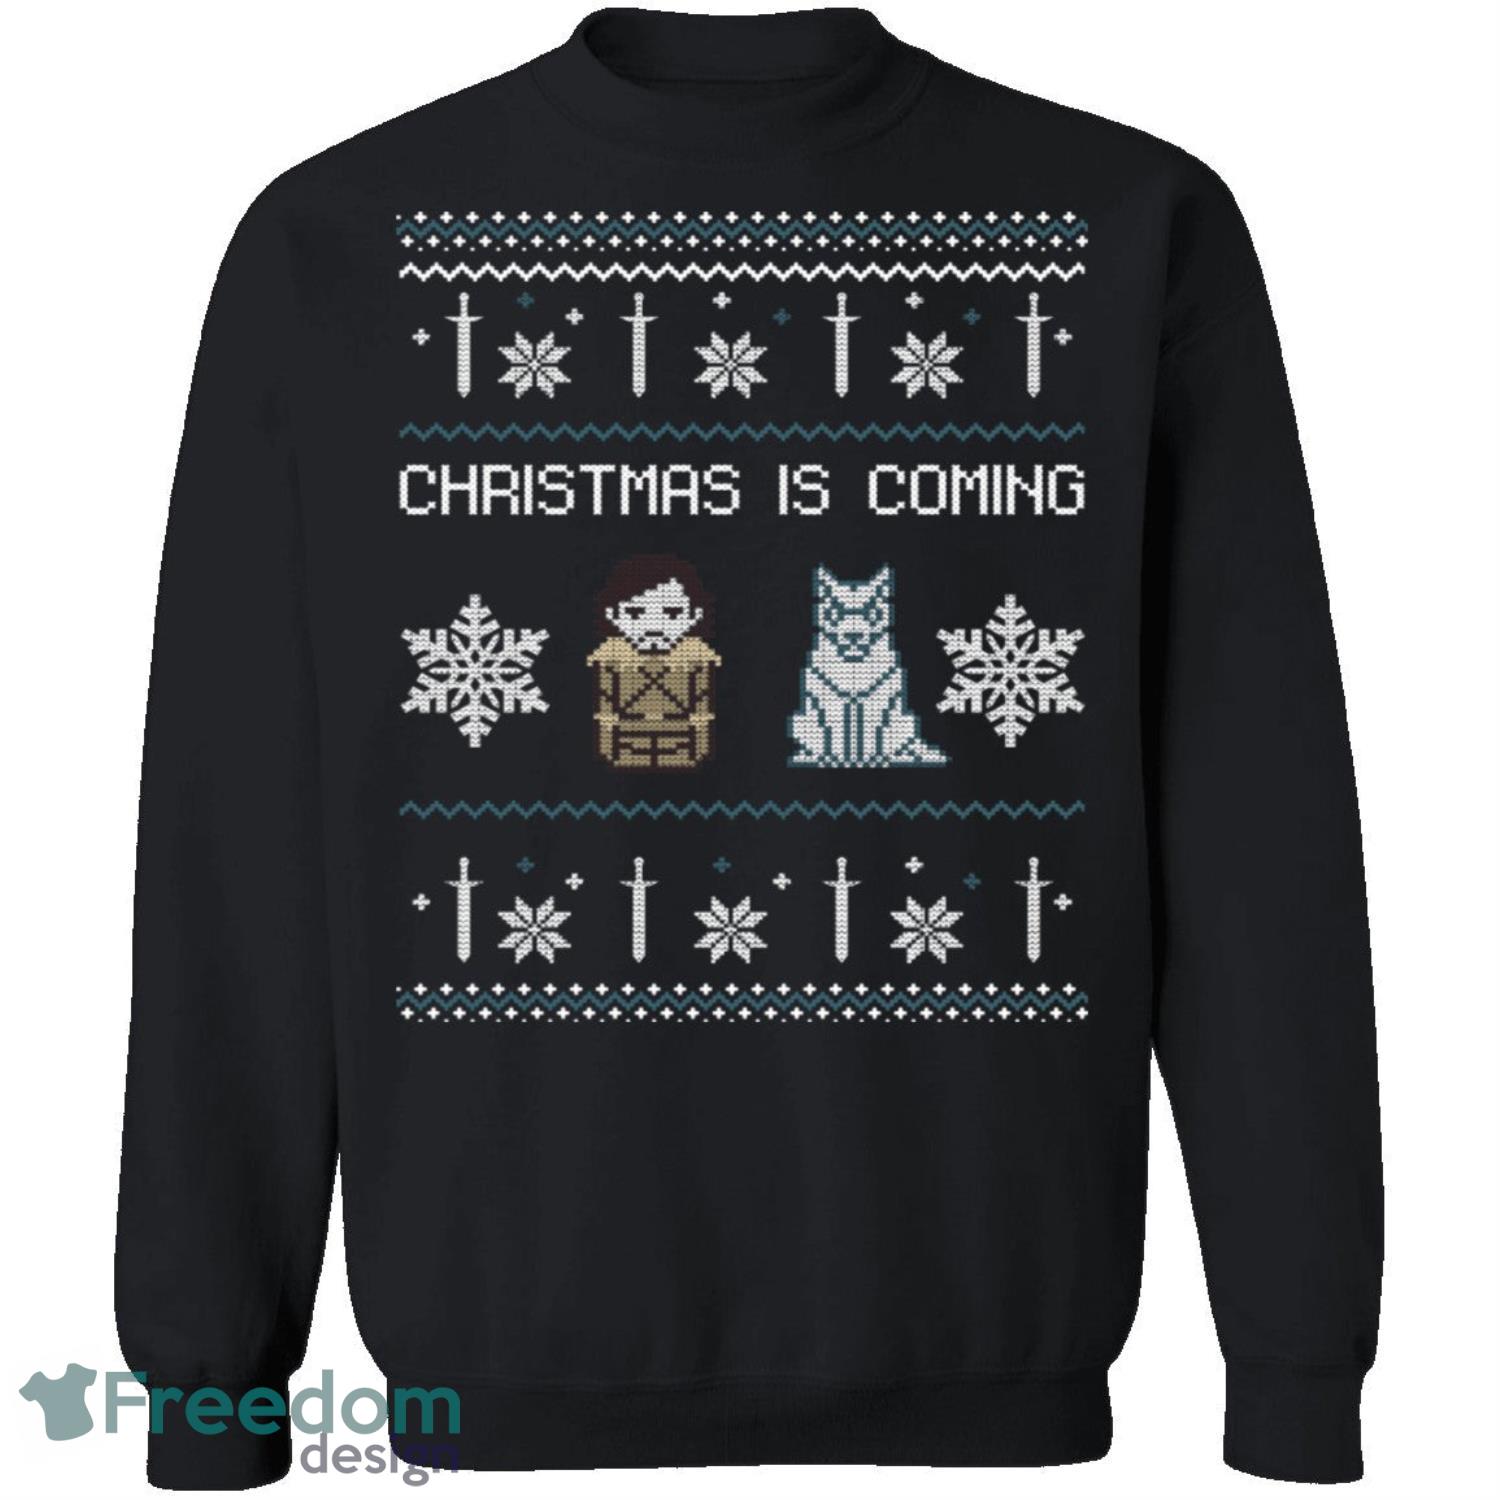 Christmas Is Coming Knitting Pattern Ugly Christmas Sweatshirt - christmas-is-coming-knitting-pattern-ugly-christmas-sweatshirt-1